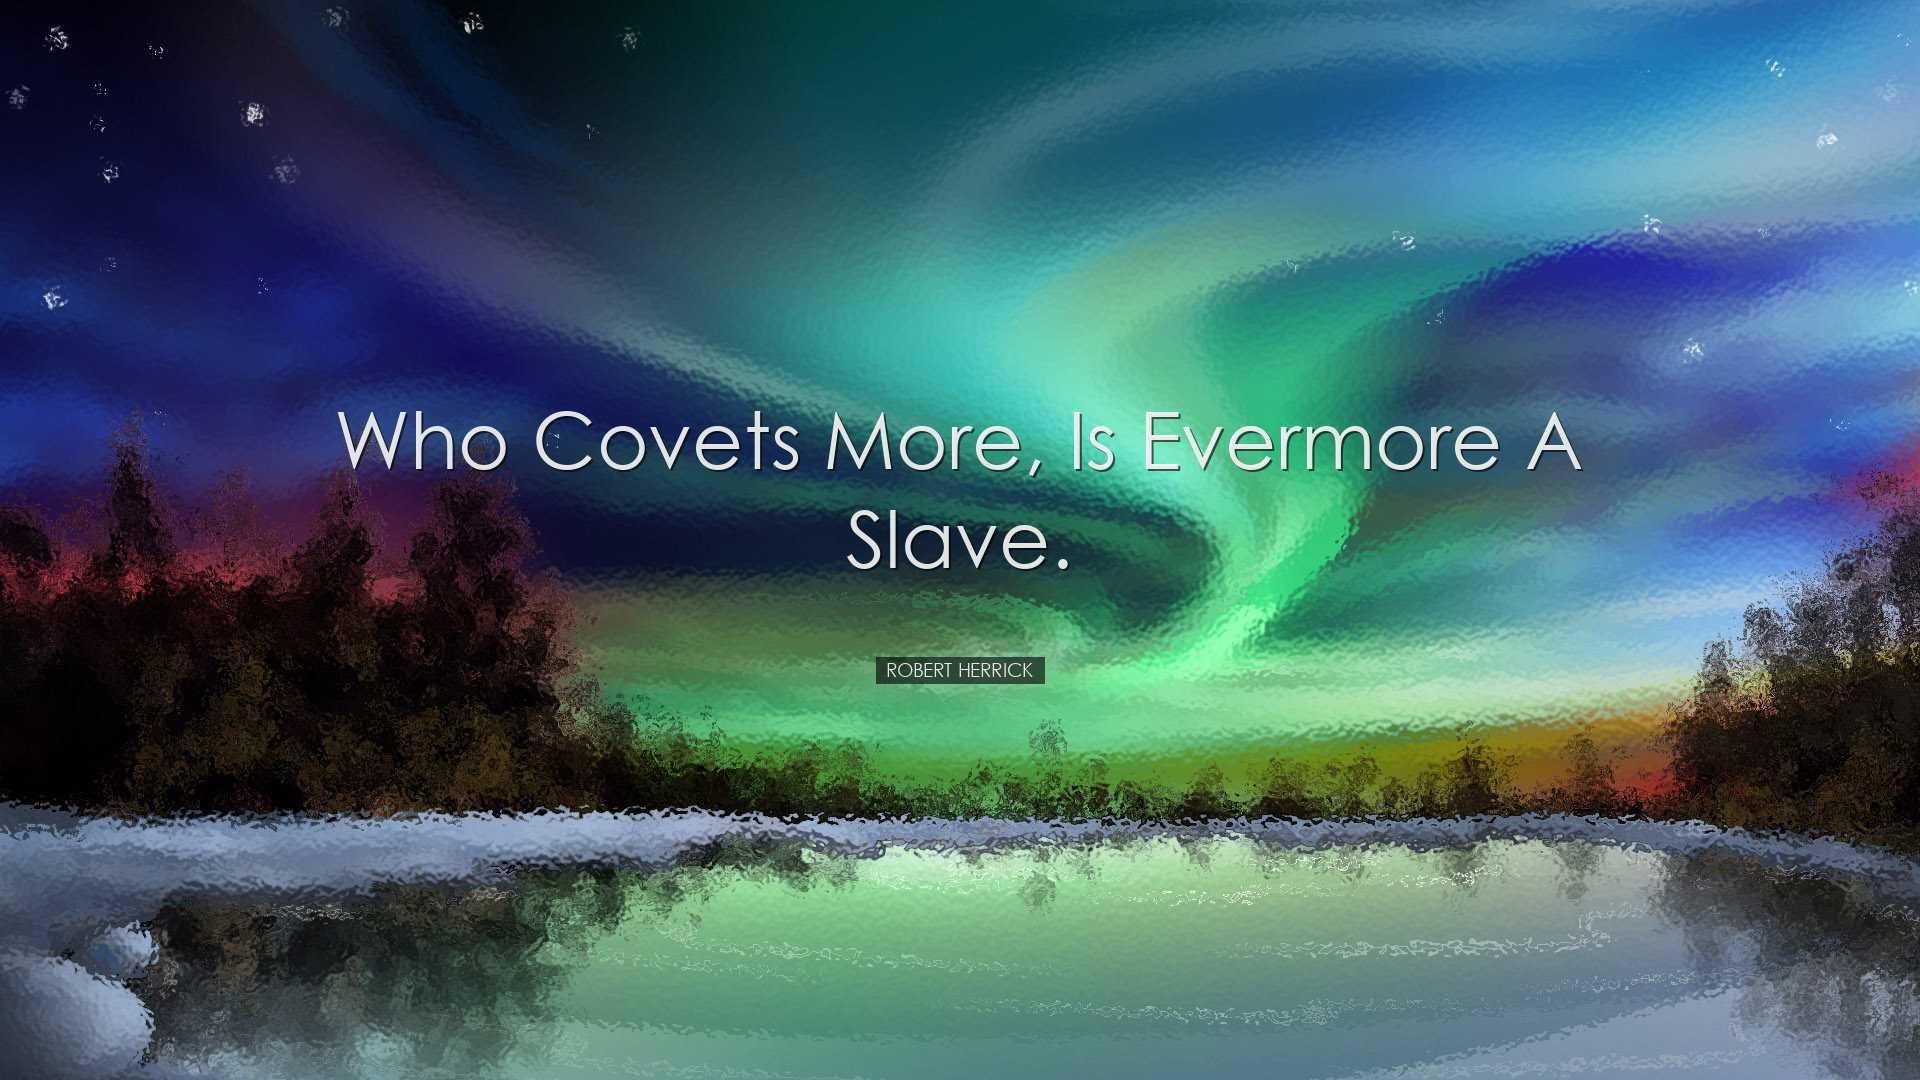 Who covets more, is evermore a slave. - Robert Herrick